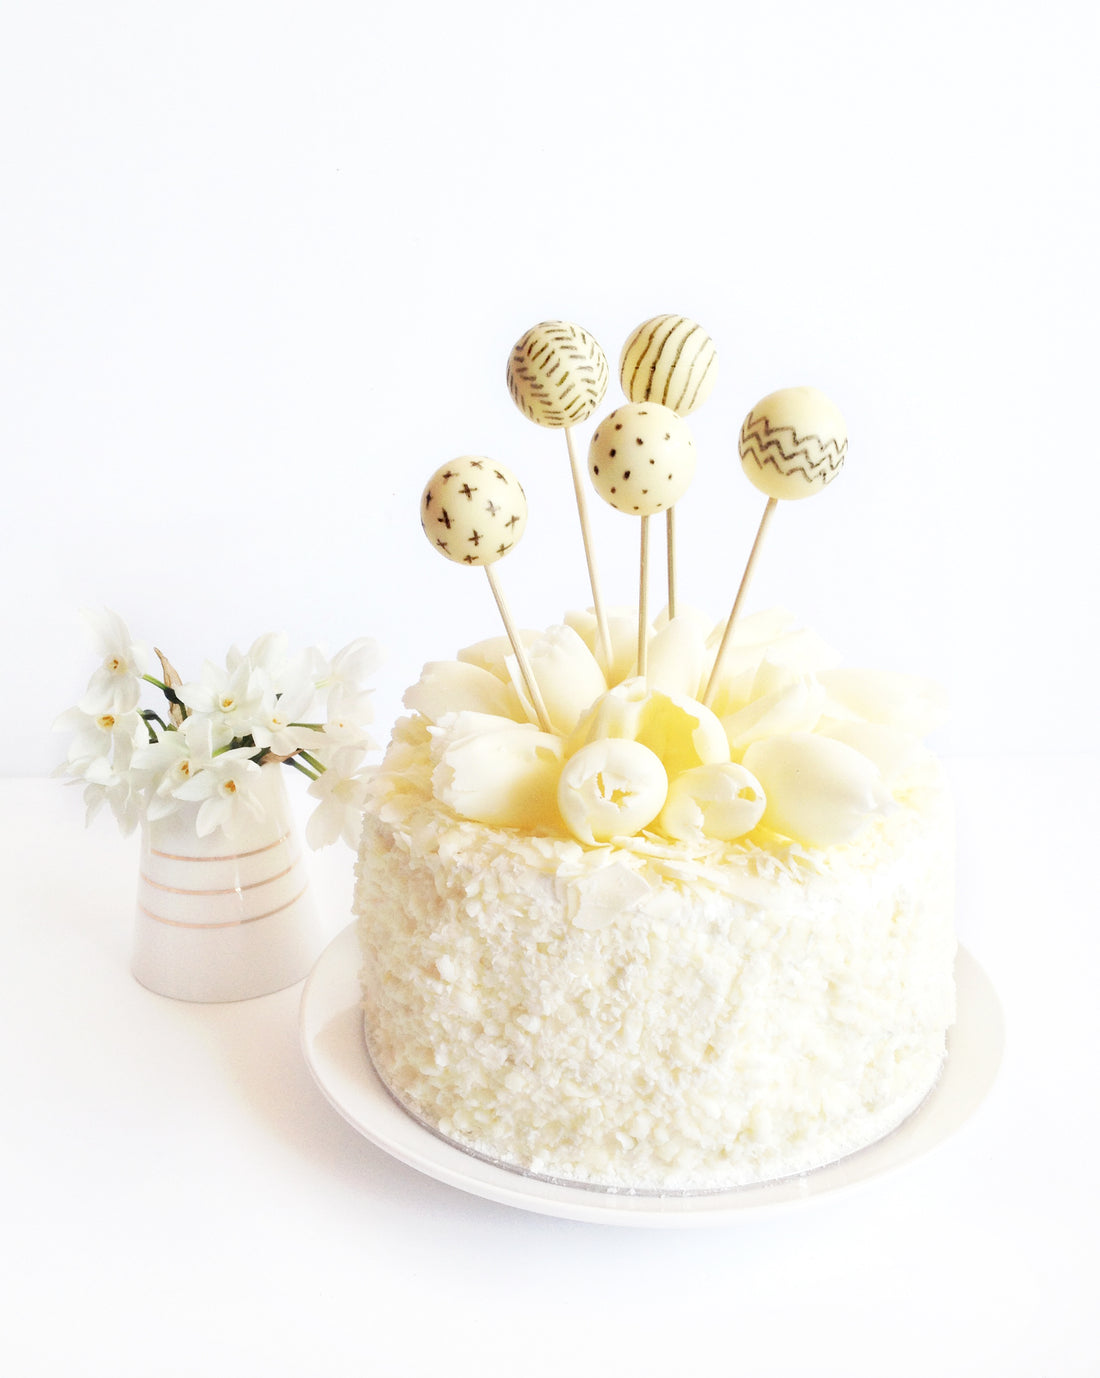 DIY easy patterned chocolate ball cake topper